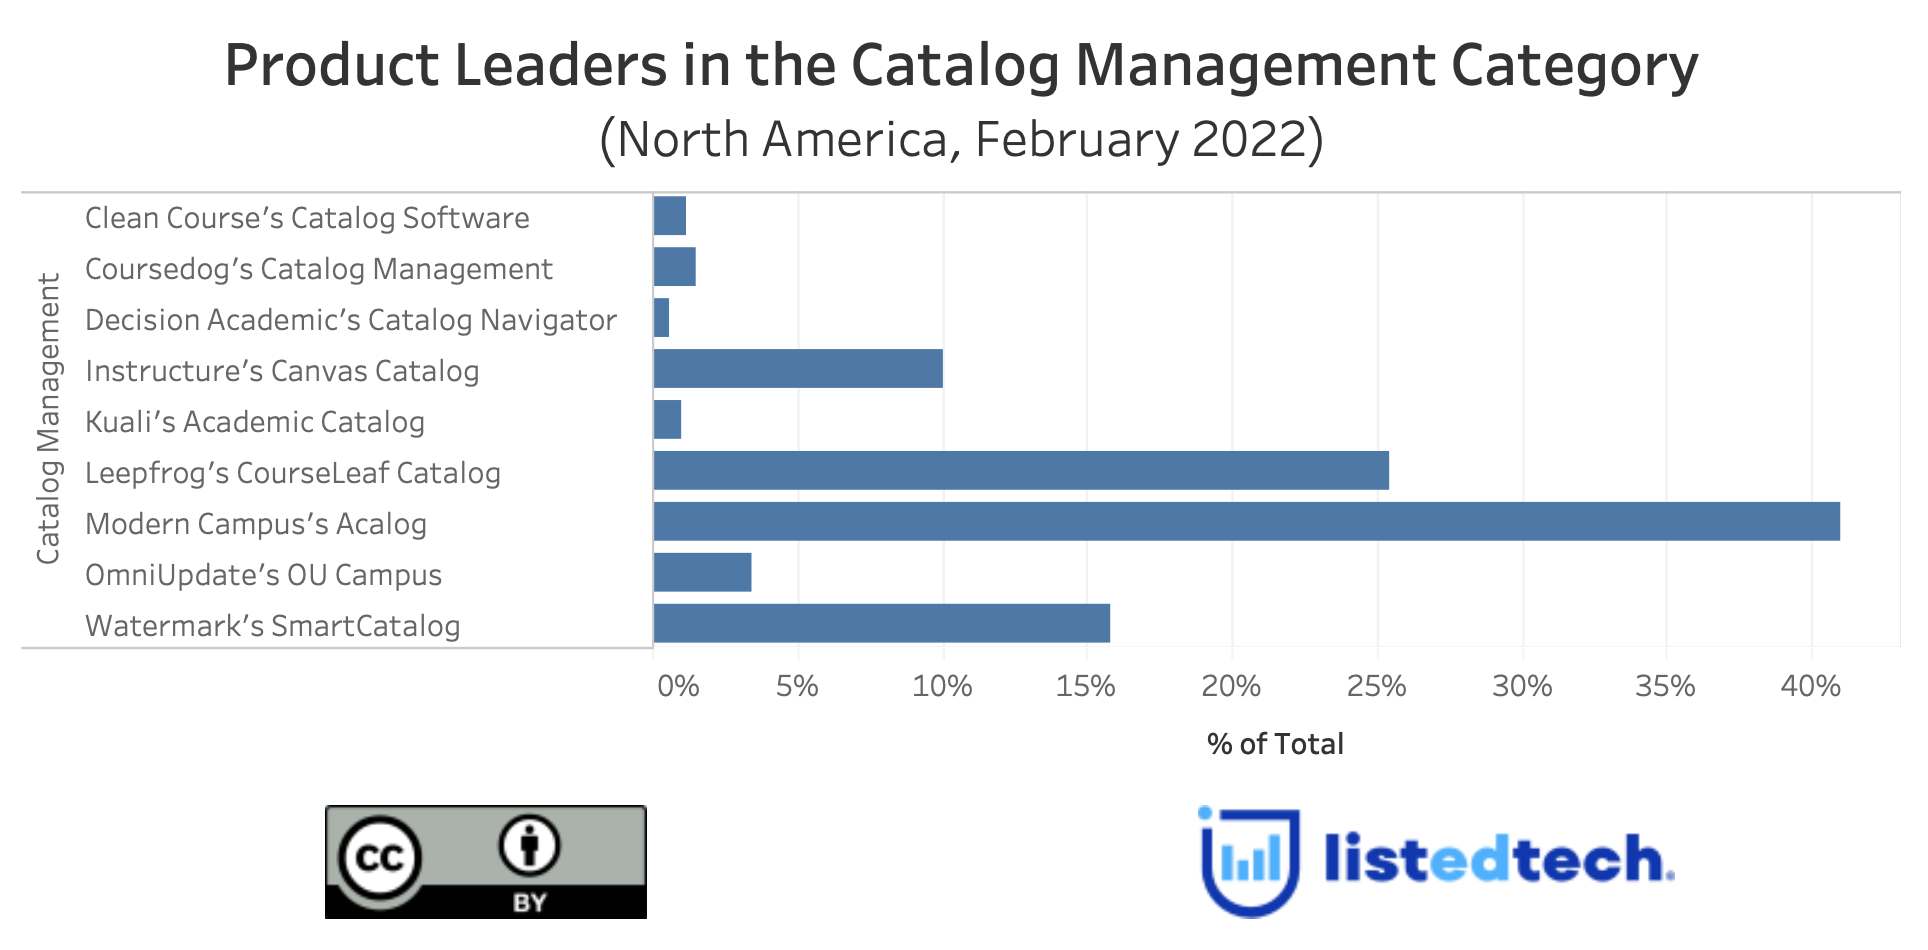 Product Leaders in the Catalog Management Category